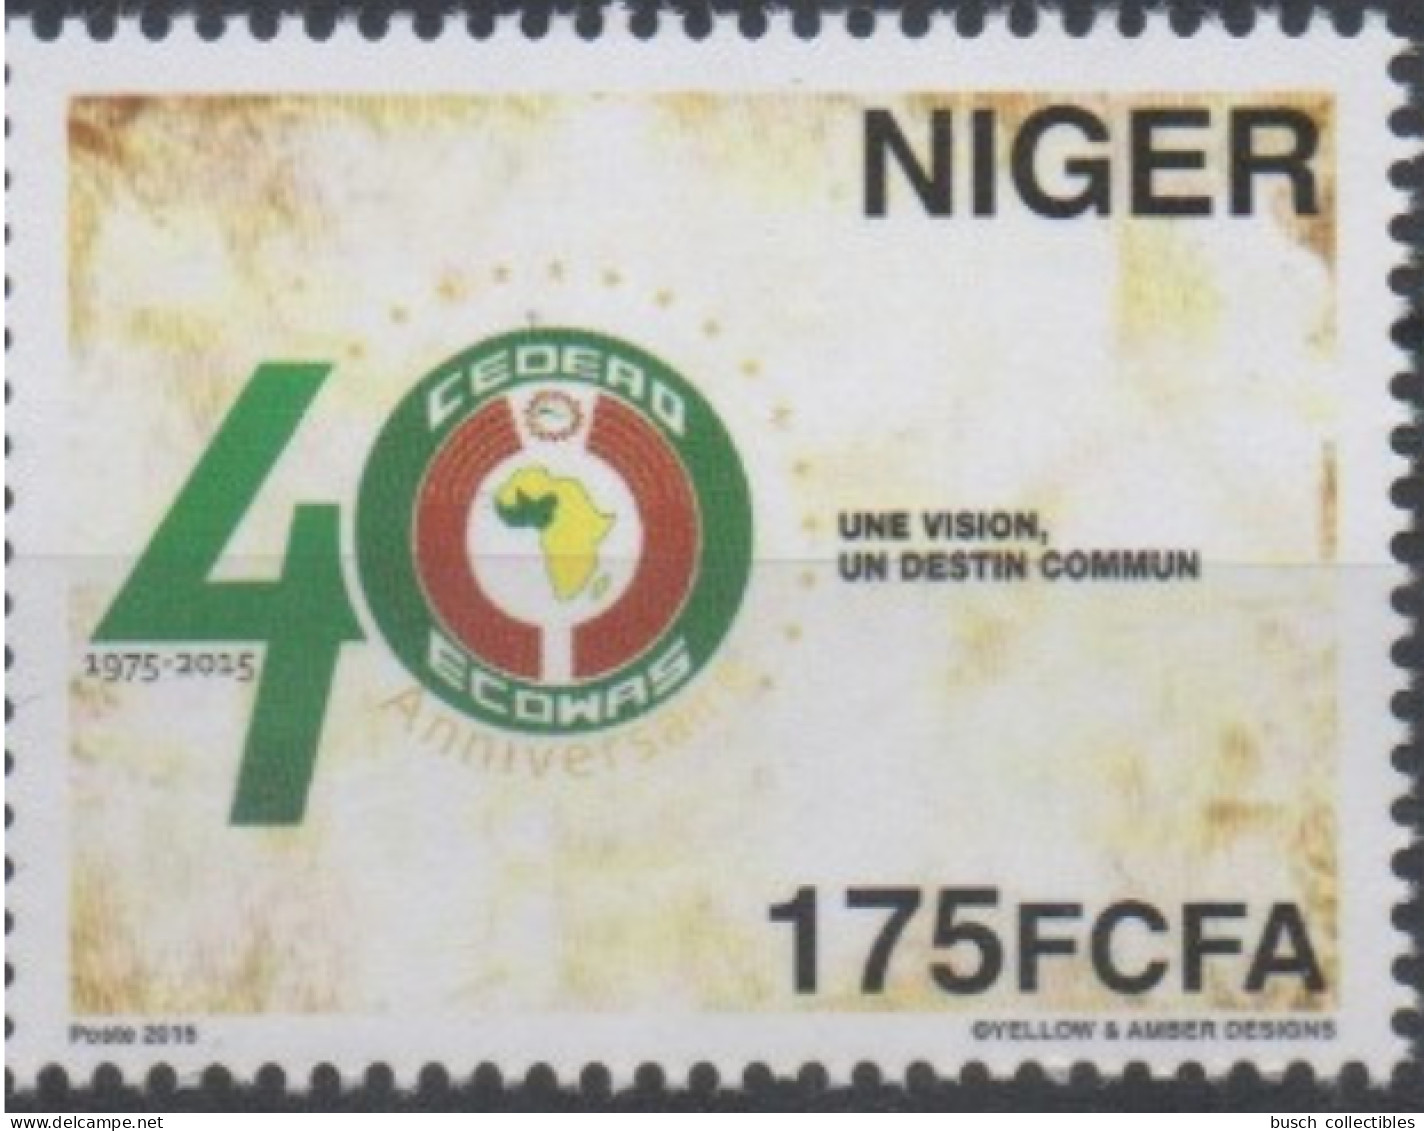 Niger 2015 Emission Commune Joint Issue CEDEAO ECOWAS 40 Ans 40 Years - Emissions Communes